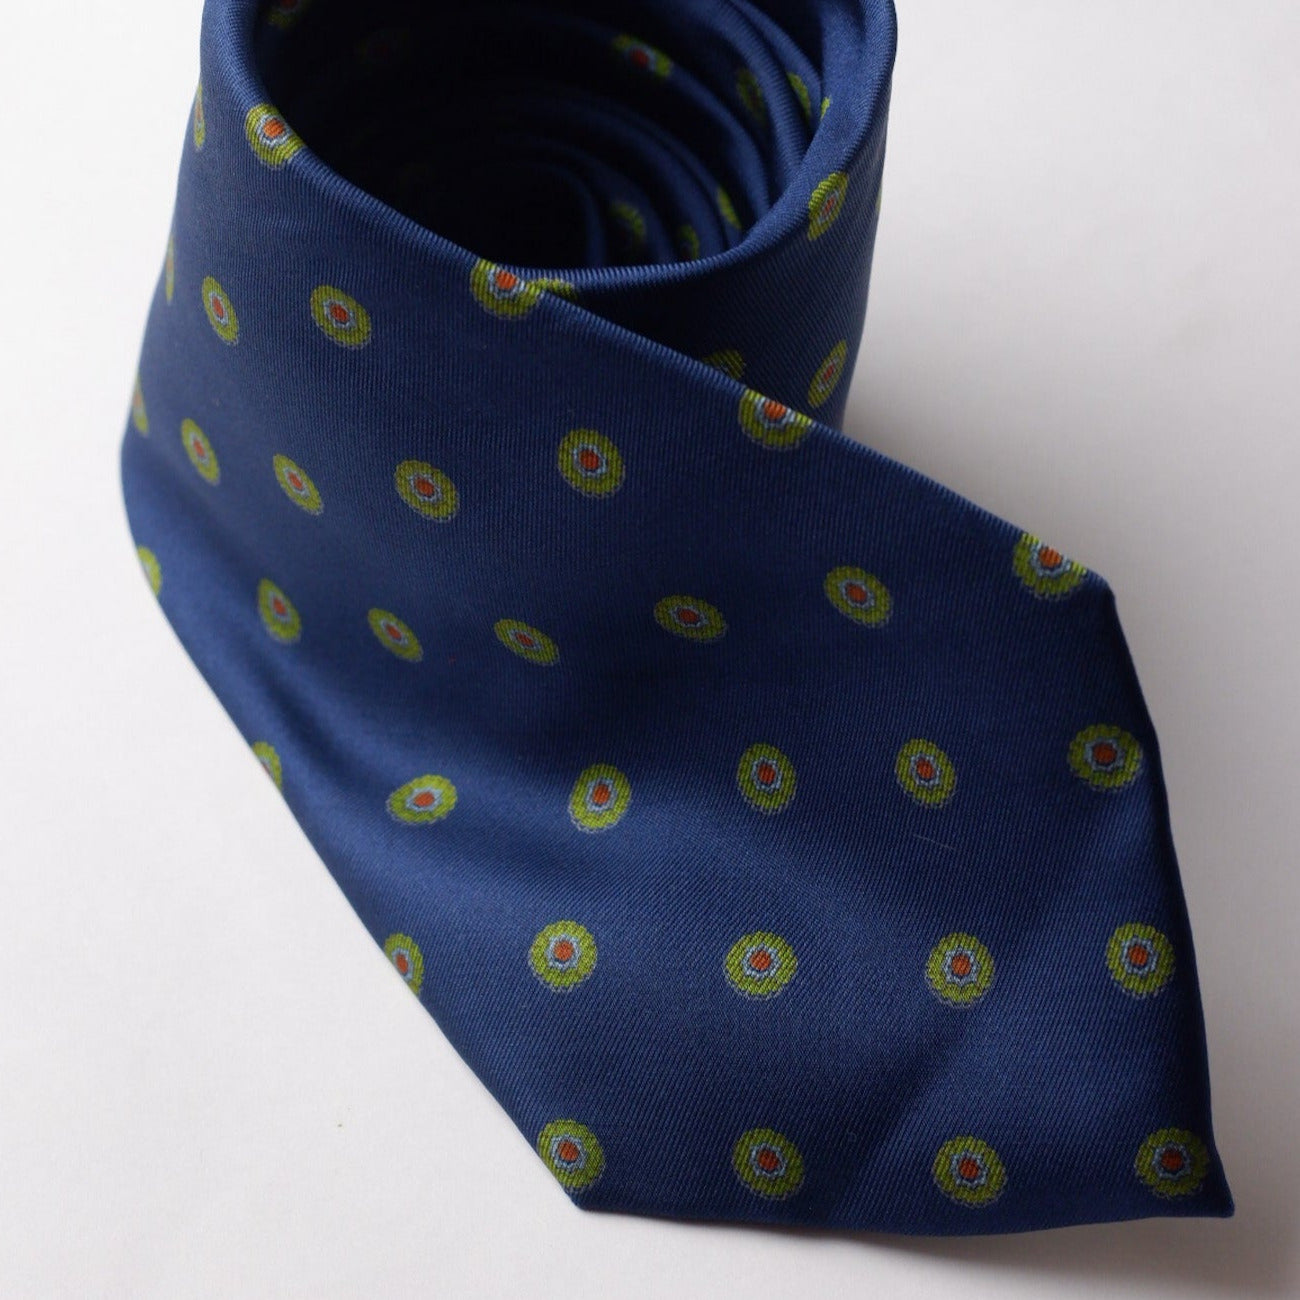 F. Marino Navy with Green Circles Printed Necktie